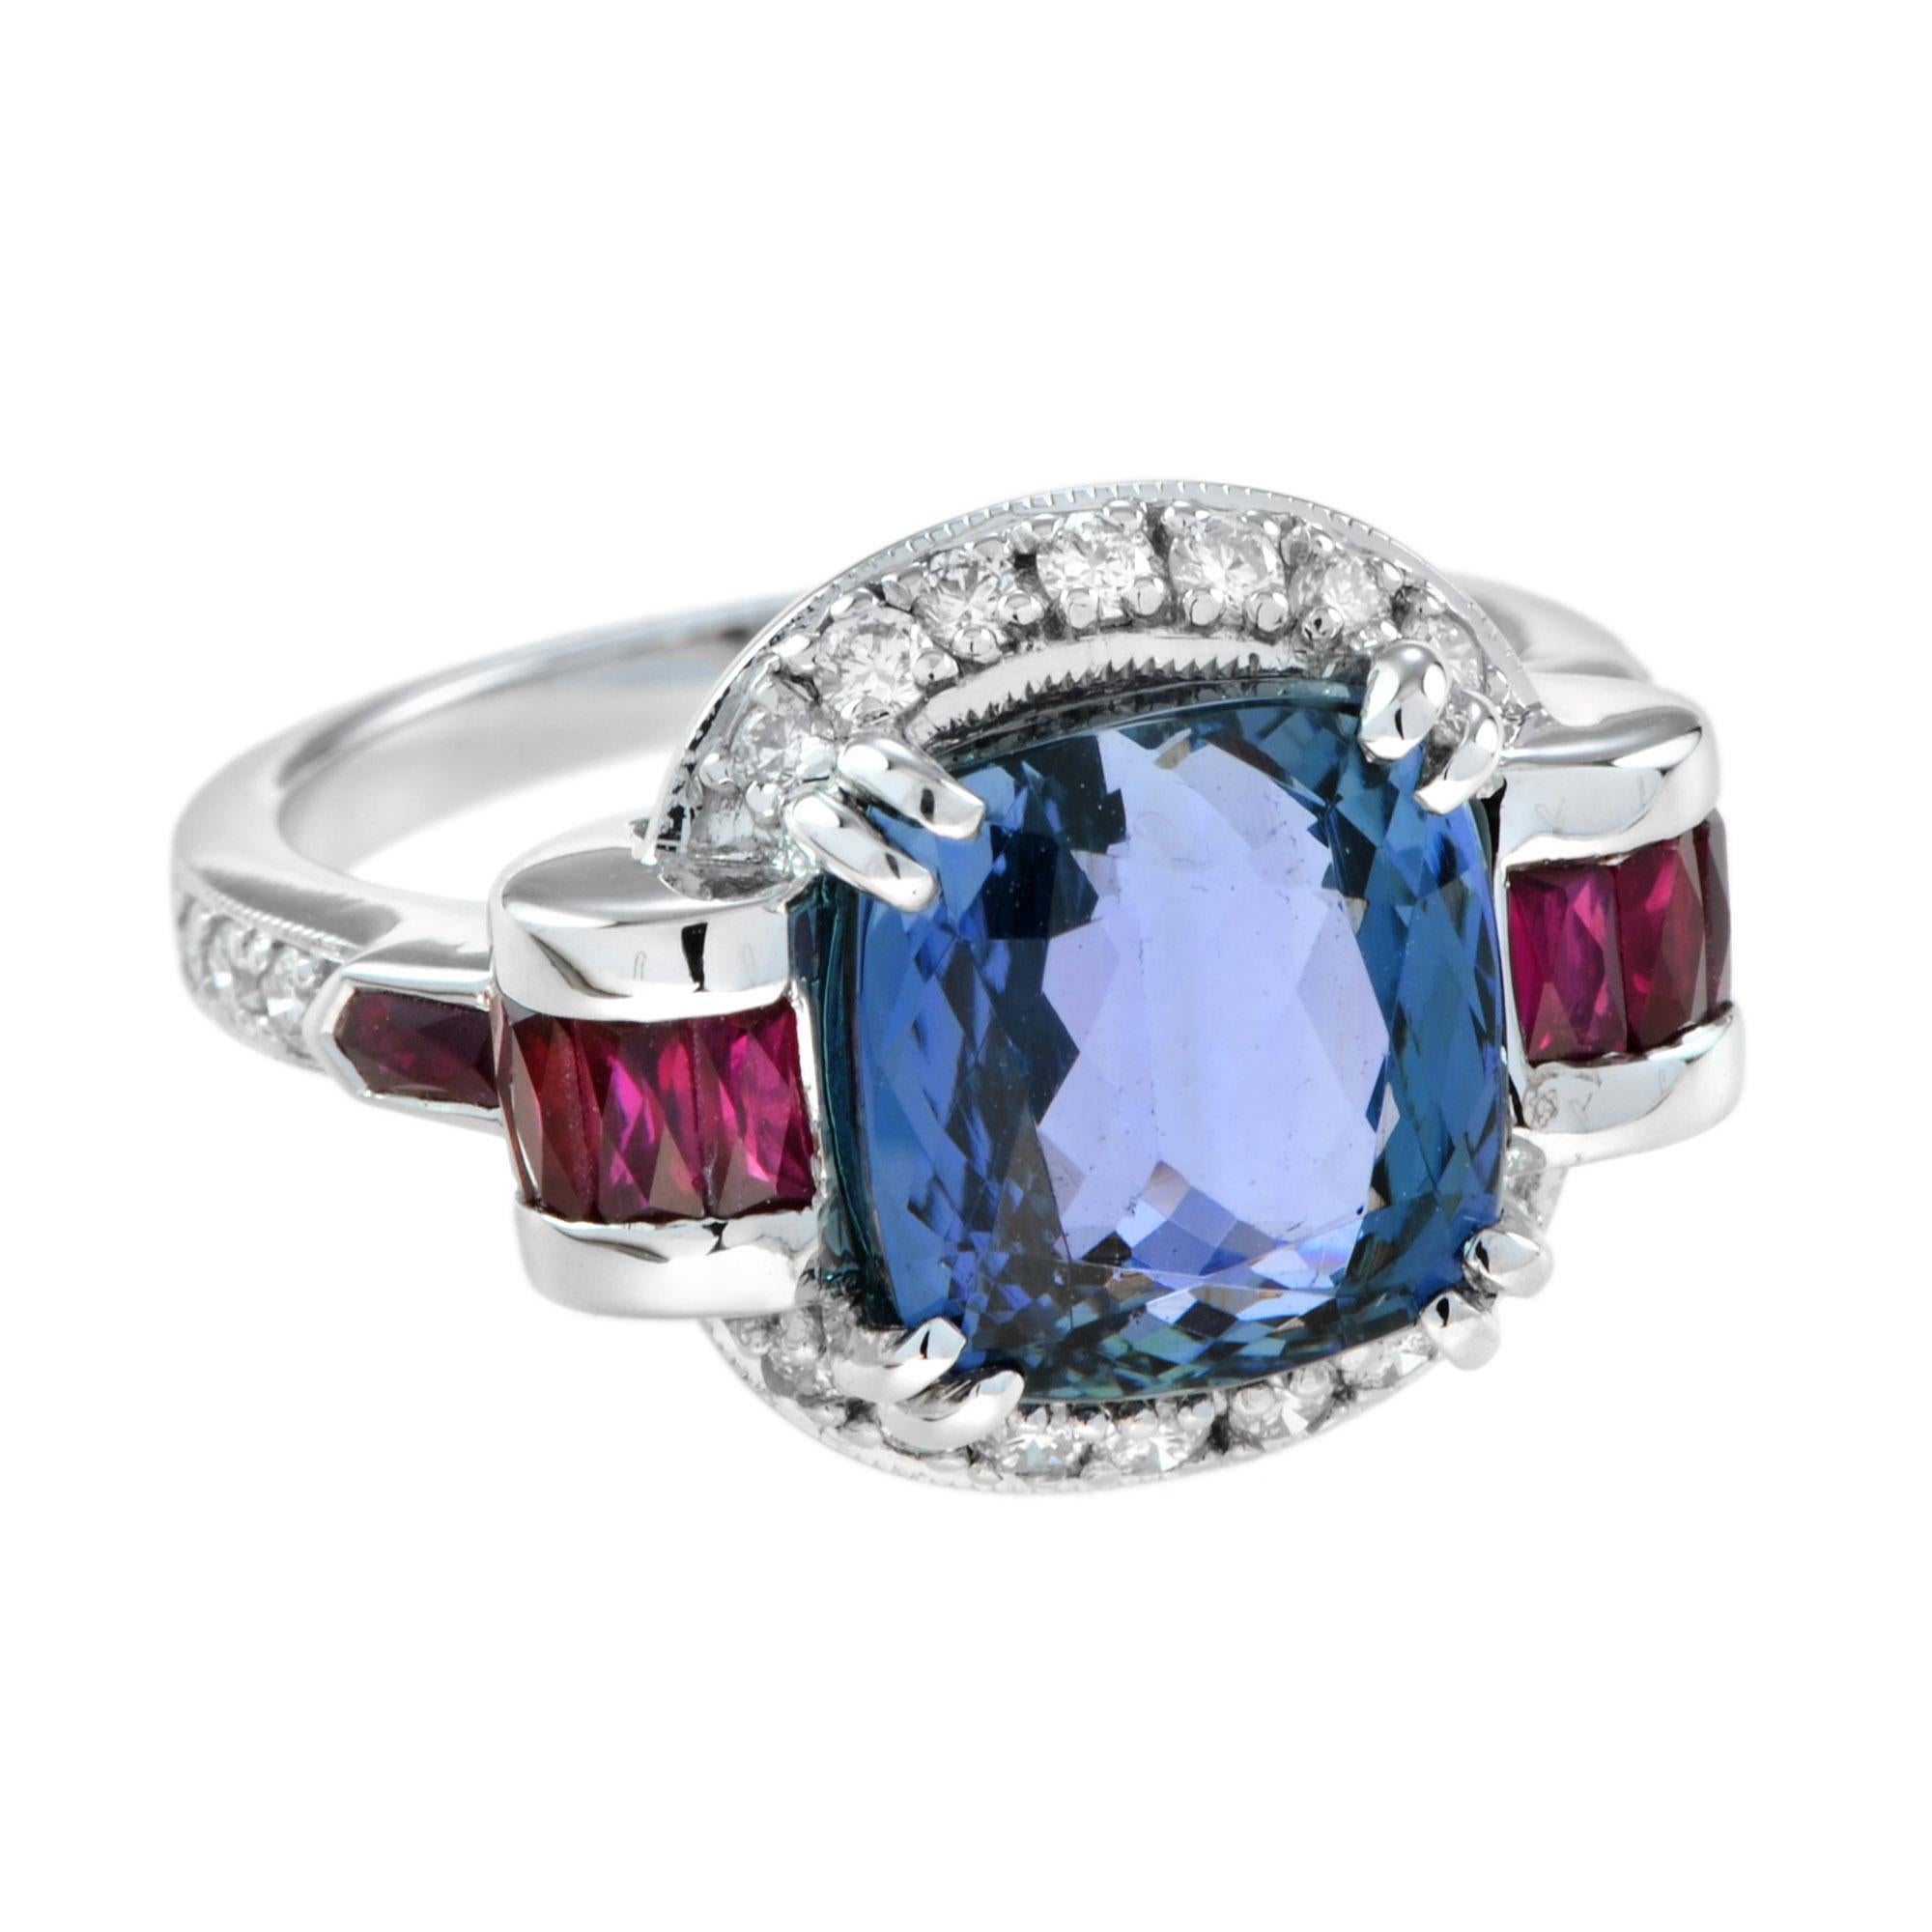 A gorgeous eye catching center stone with the perfect touch of diamonds and rubies. The tanzanite is a nice size at 10 x 9.5 mm., 6.15 carats. The tanzanite is eye clean and has a beautiful rich bluish purple hue. The center stone is enhanced by the